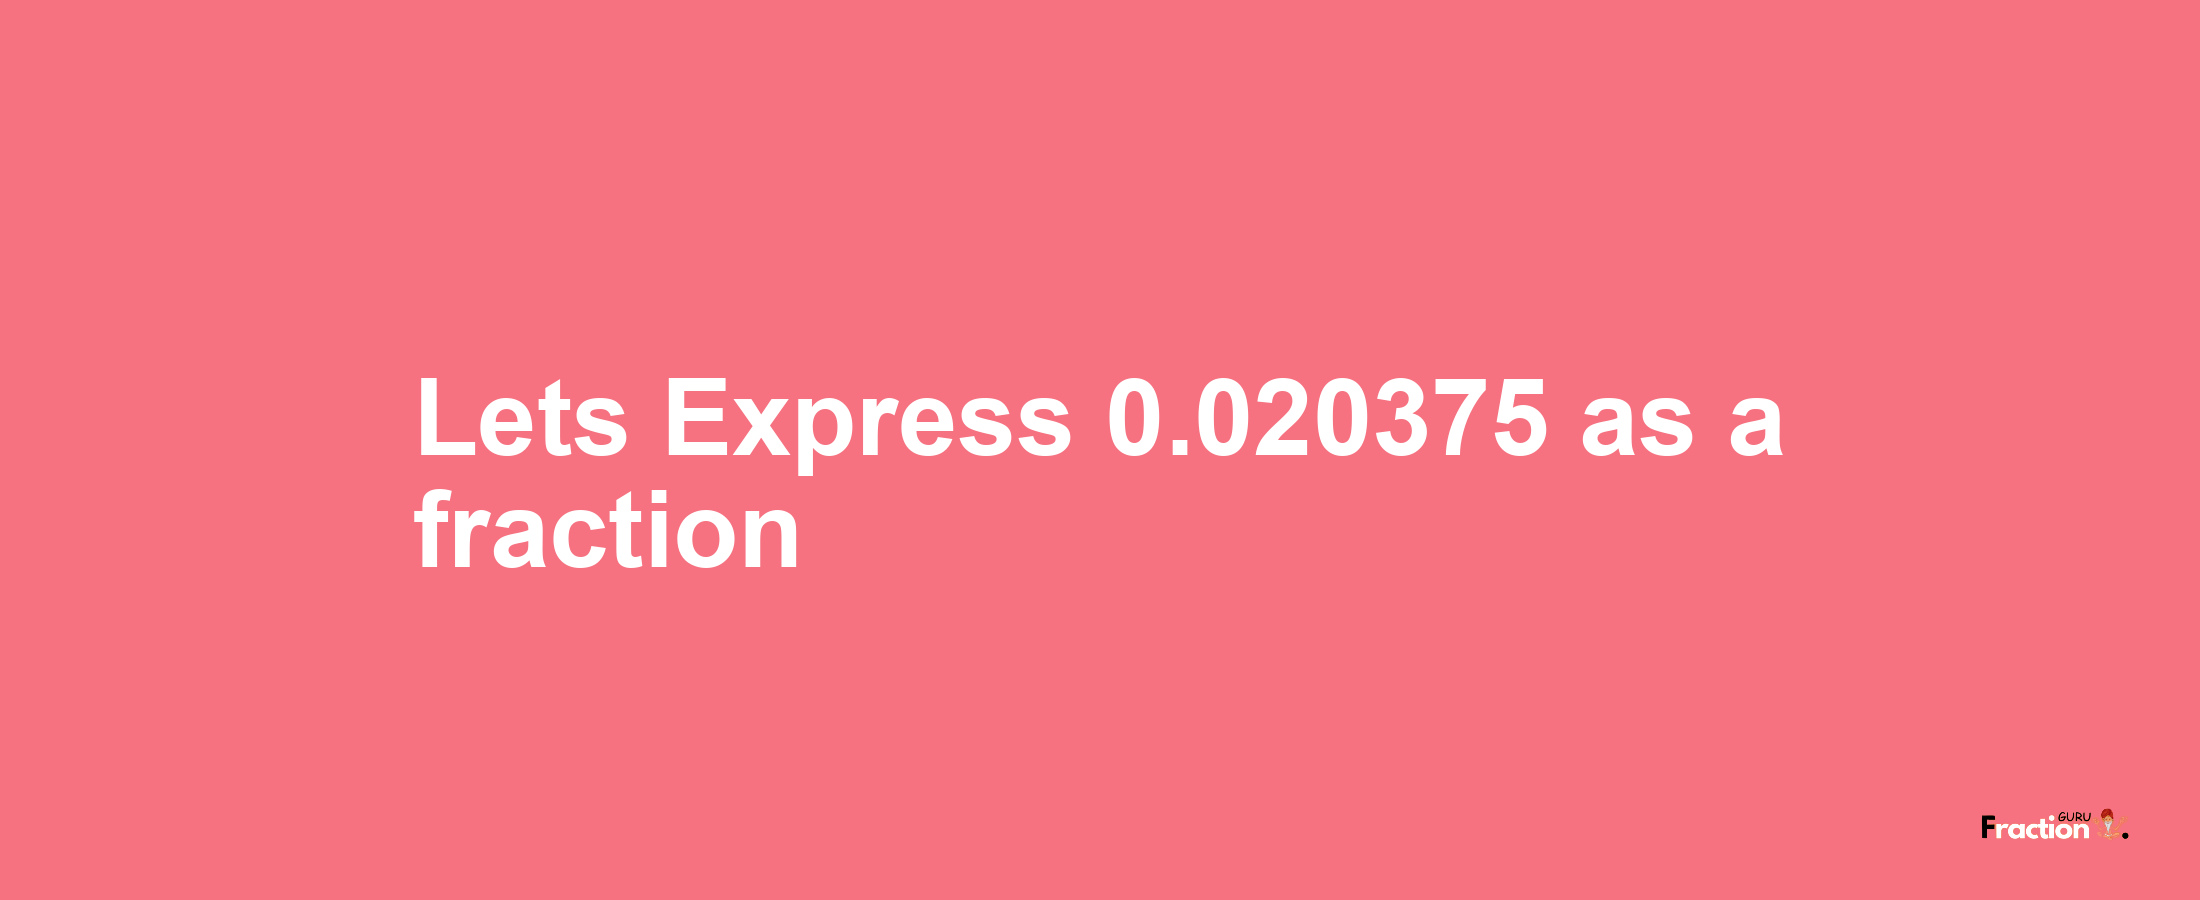 Lets Express 0.020375 as afraction